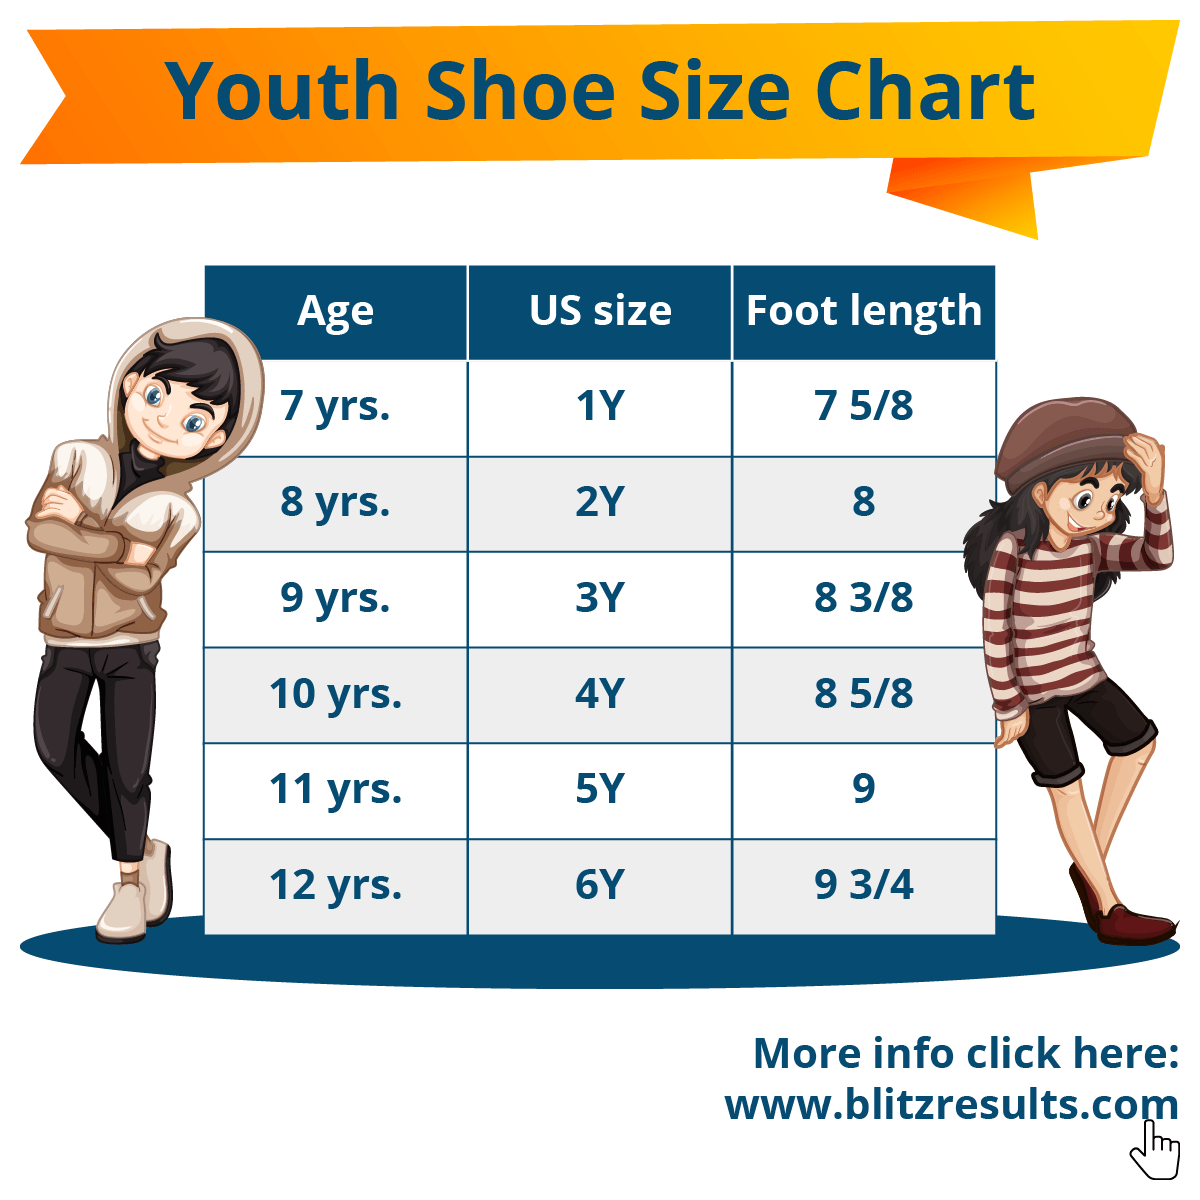 ᐅ Kids Shoe Sizes: Conversion Charts, Size by Age, How to ...